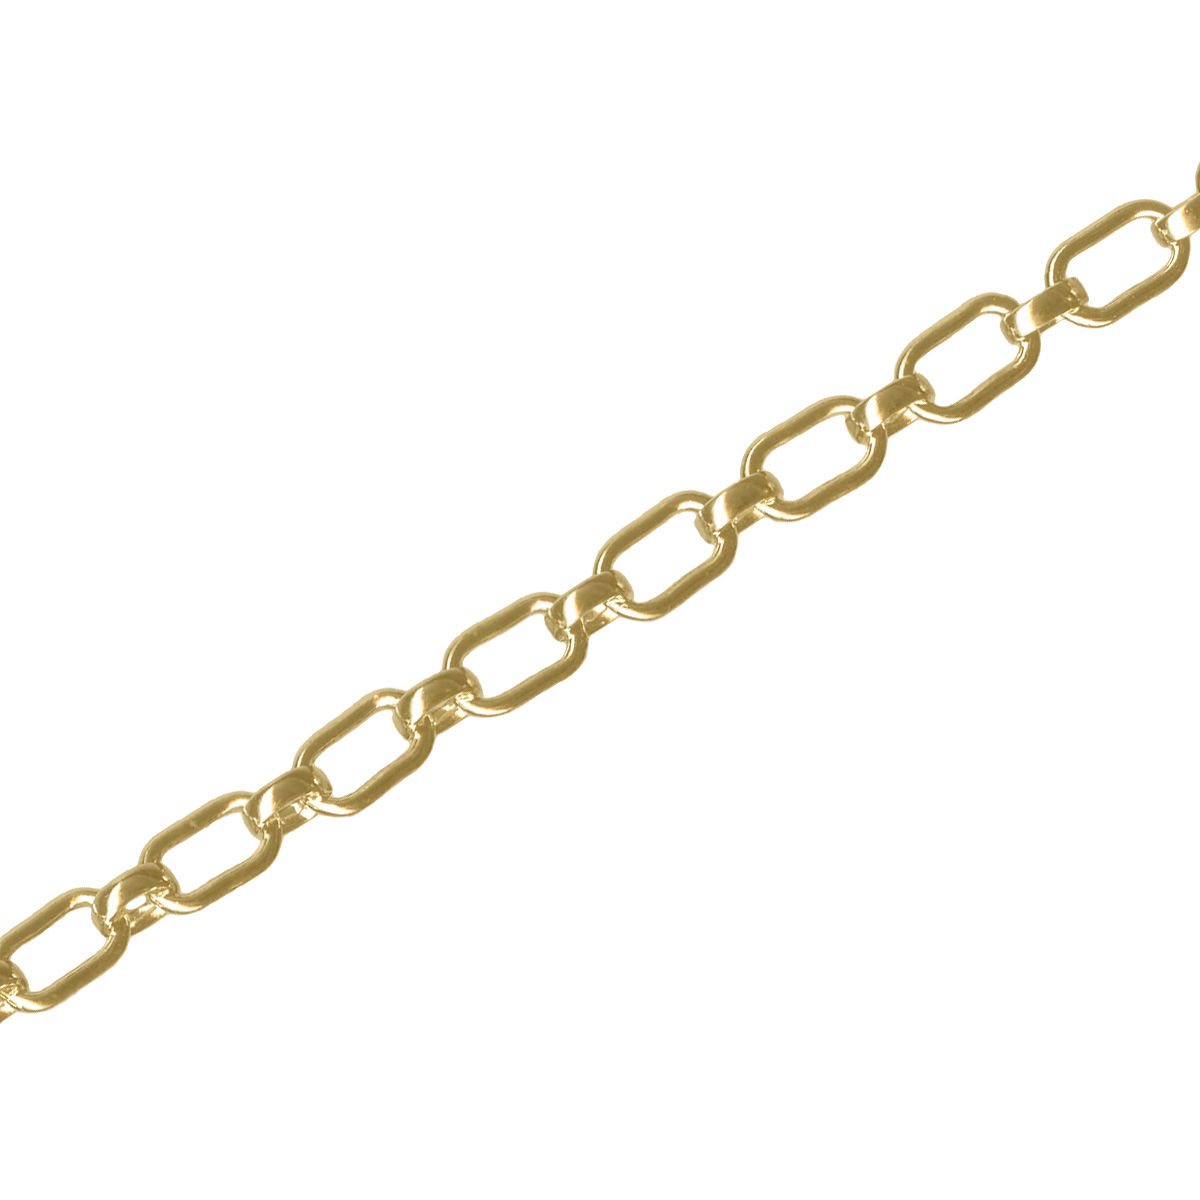 jewelry chain 1/20, 12kt gold-filled heavy long u0026 short chain, footage VMHCIYK